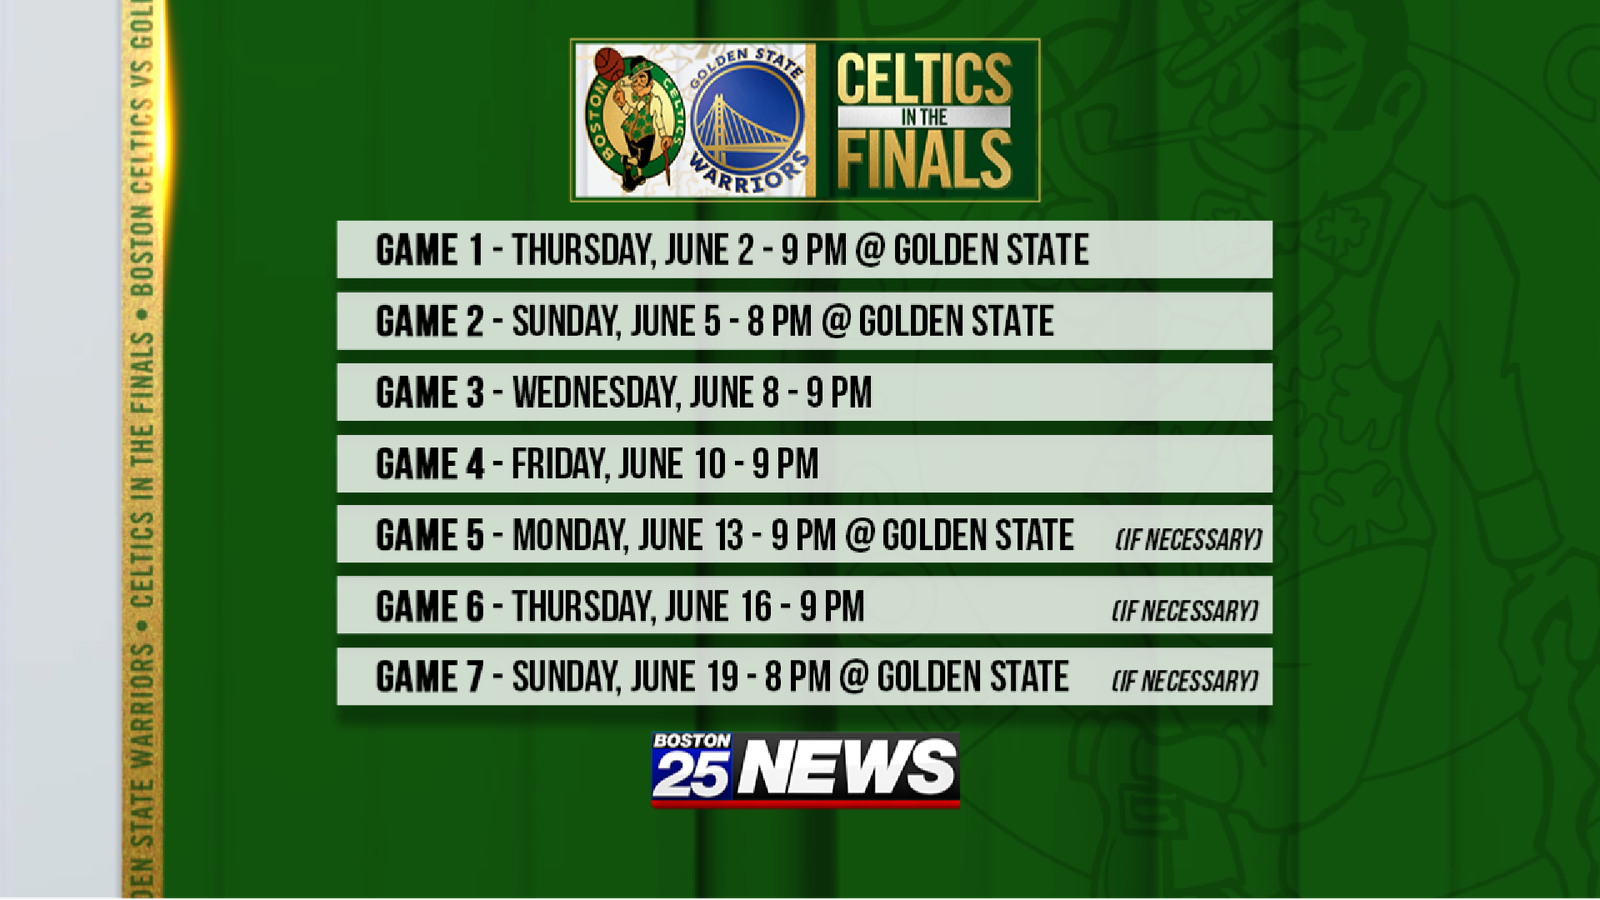 NBA Finals bound! The Celtics will face the Golden State Warriors after